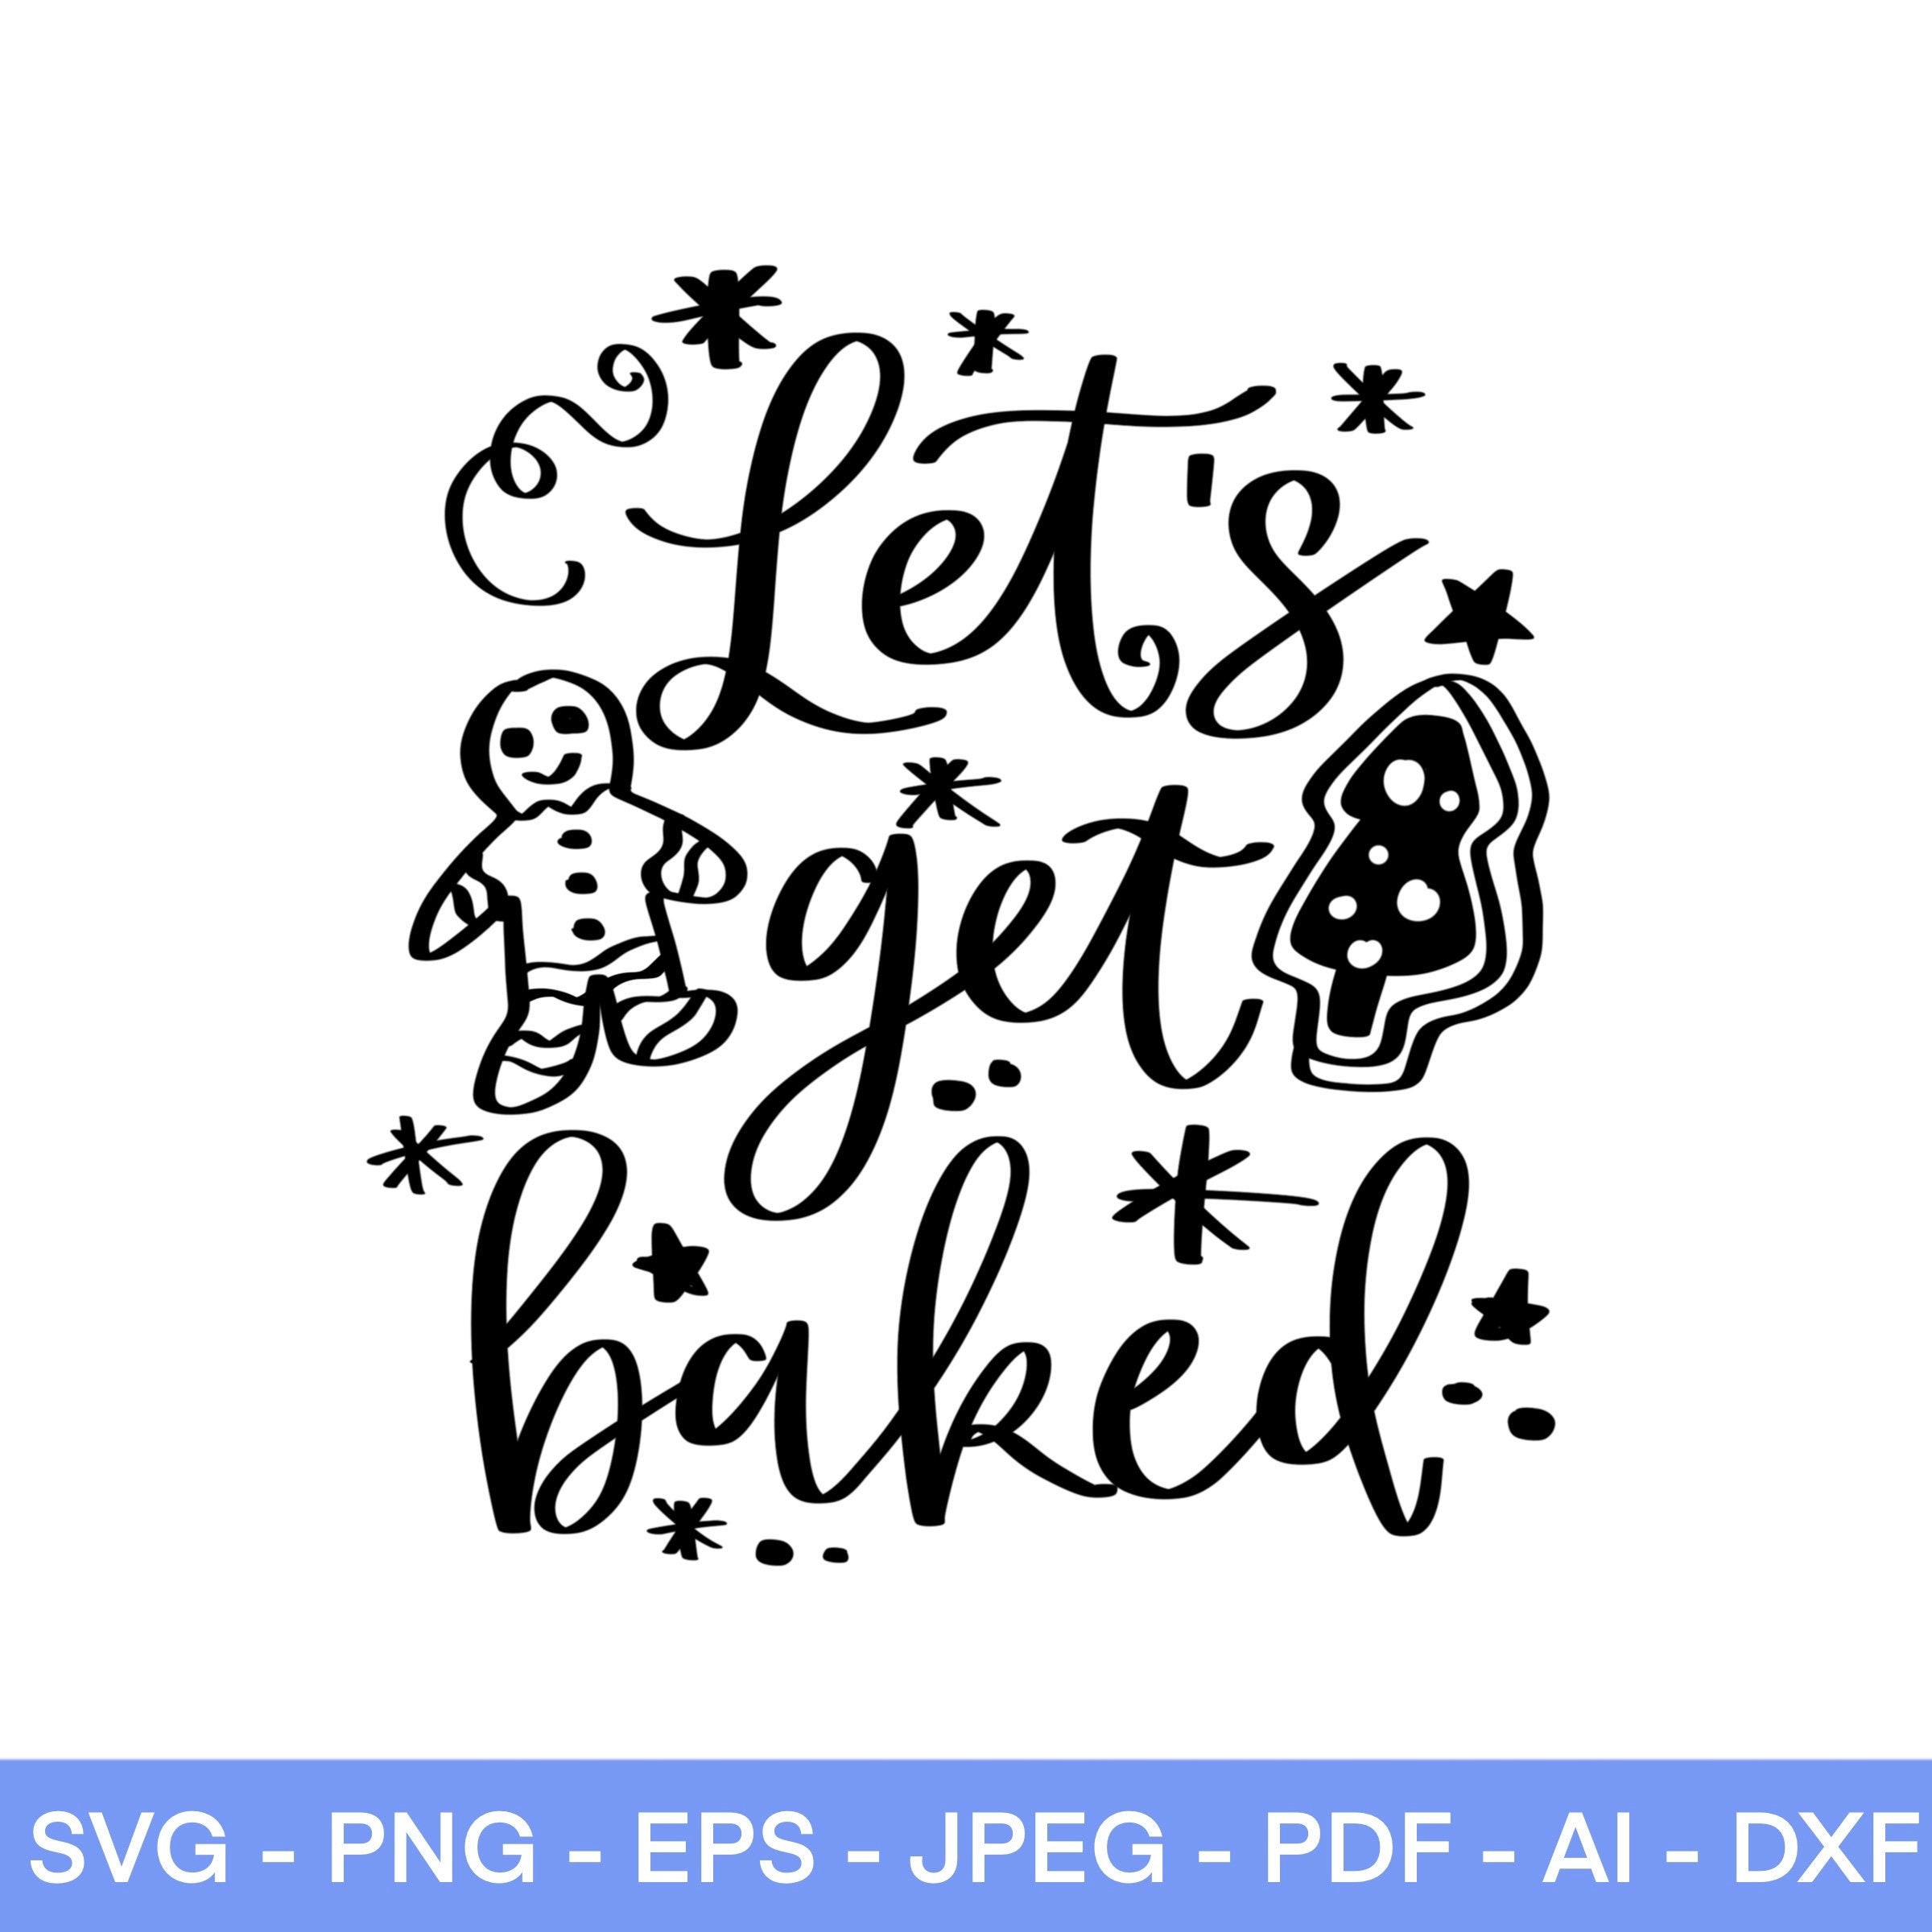 Let's Get Baked, Holiday Funny Saying Oven Mitt